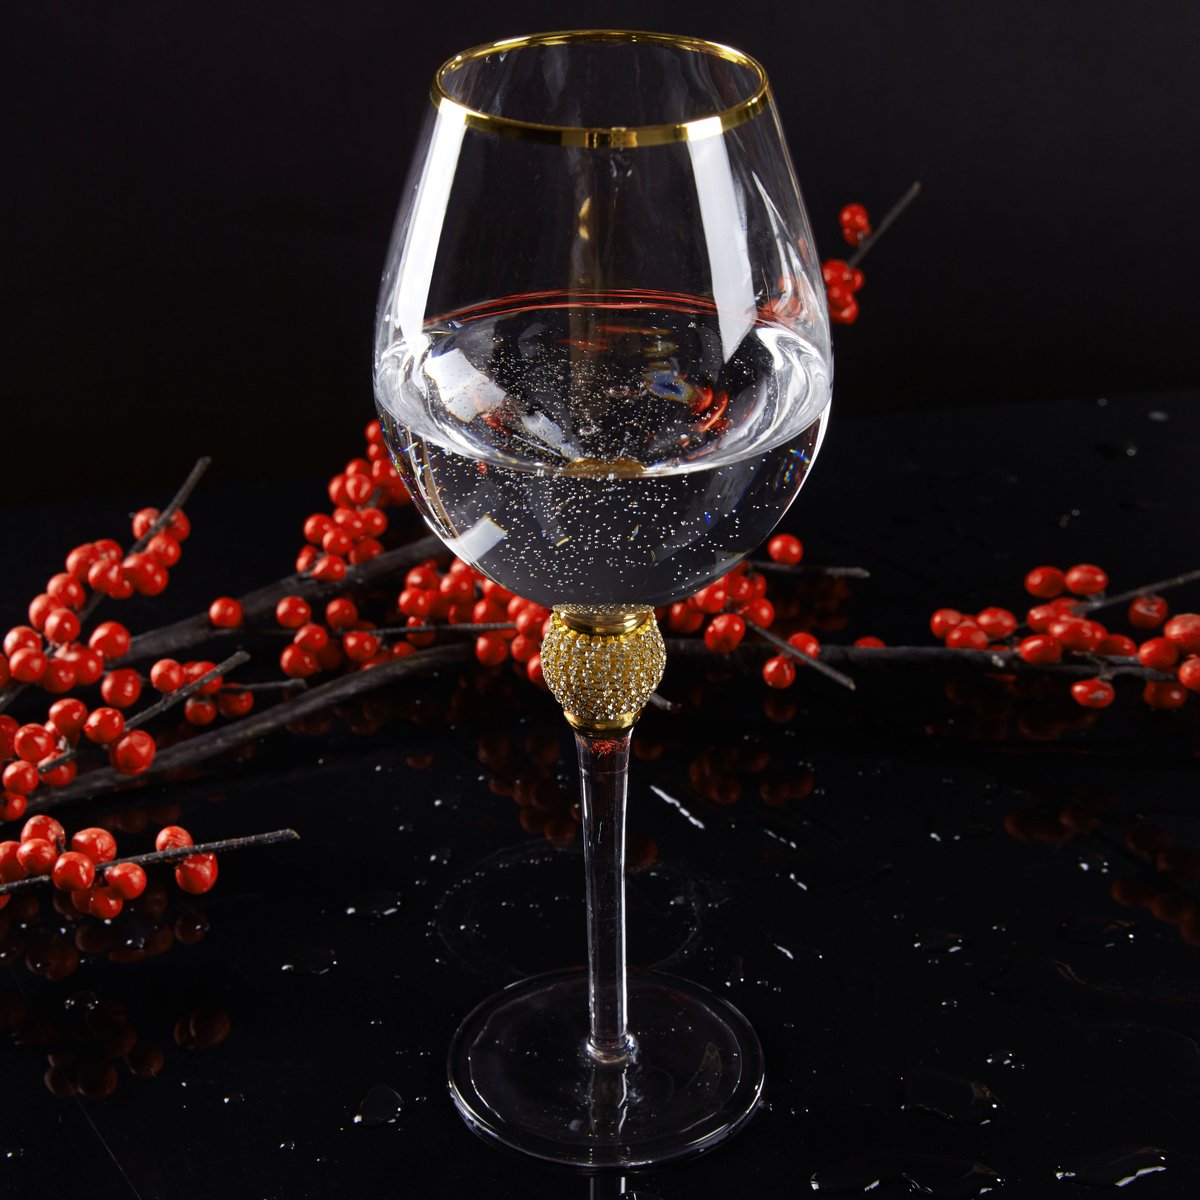 https://images.verishop.com/berkware-luxurious-and-elegant-sparkling-studded-long-stem-red-wine-glass-with-gold-tone-rim-set-of-6-wine-glasses/M00810026170560-458472389?auto=format&cs=strip&fit=max&w=1200